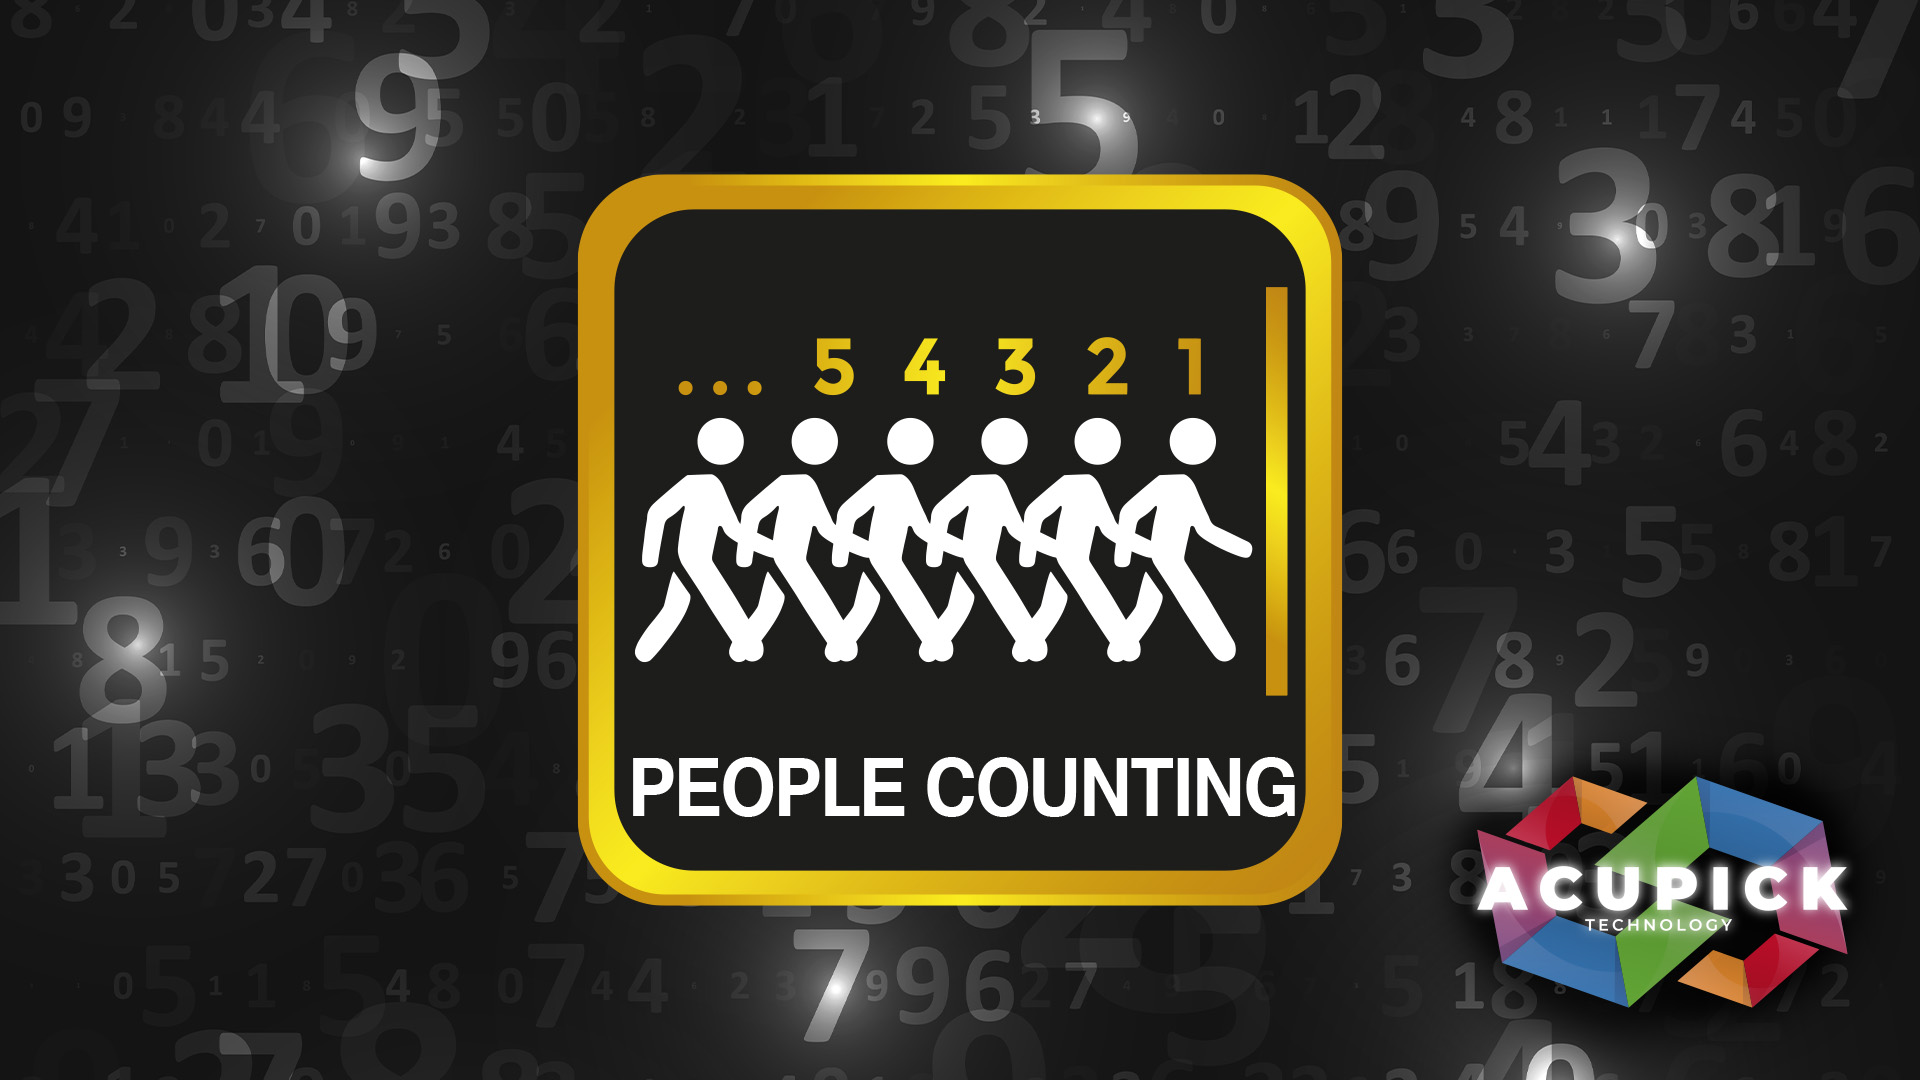 People Counting Using ACUPICK